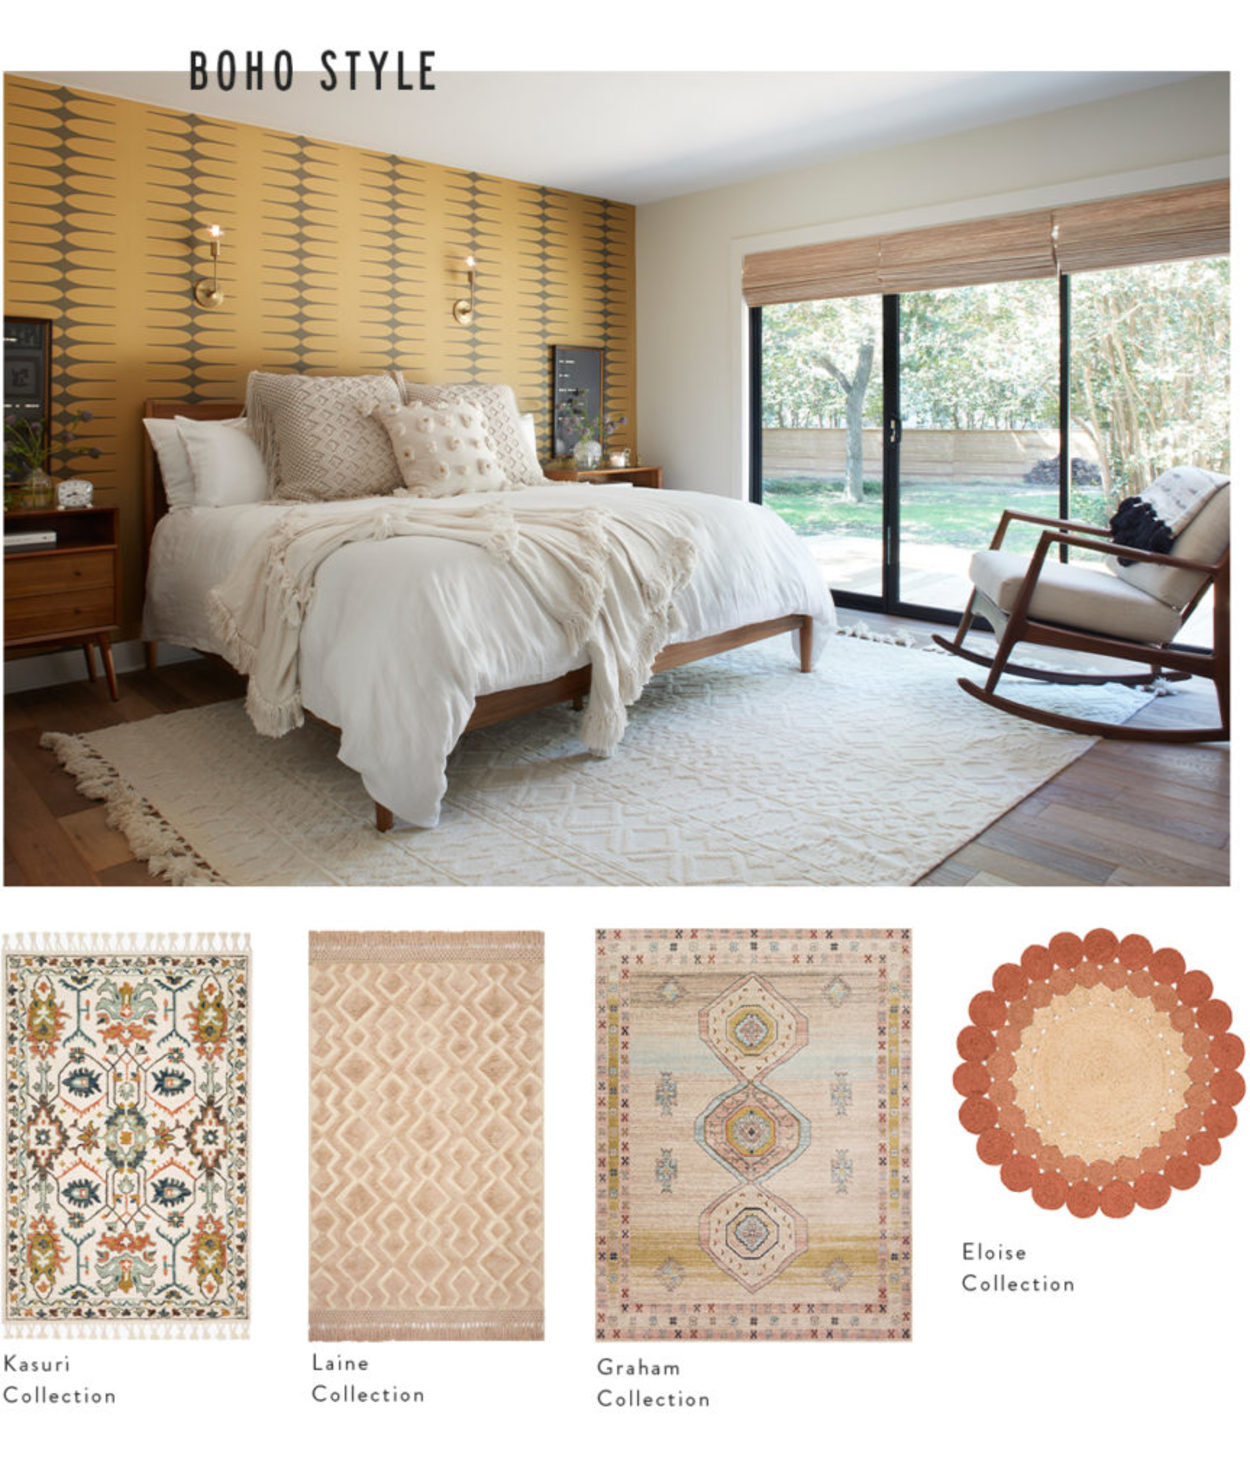 Choosing the Best Rug for Your Space Blog - Magnolia